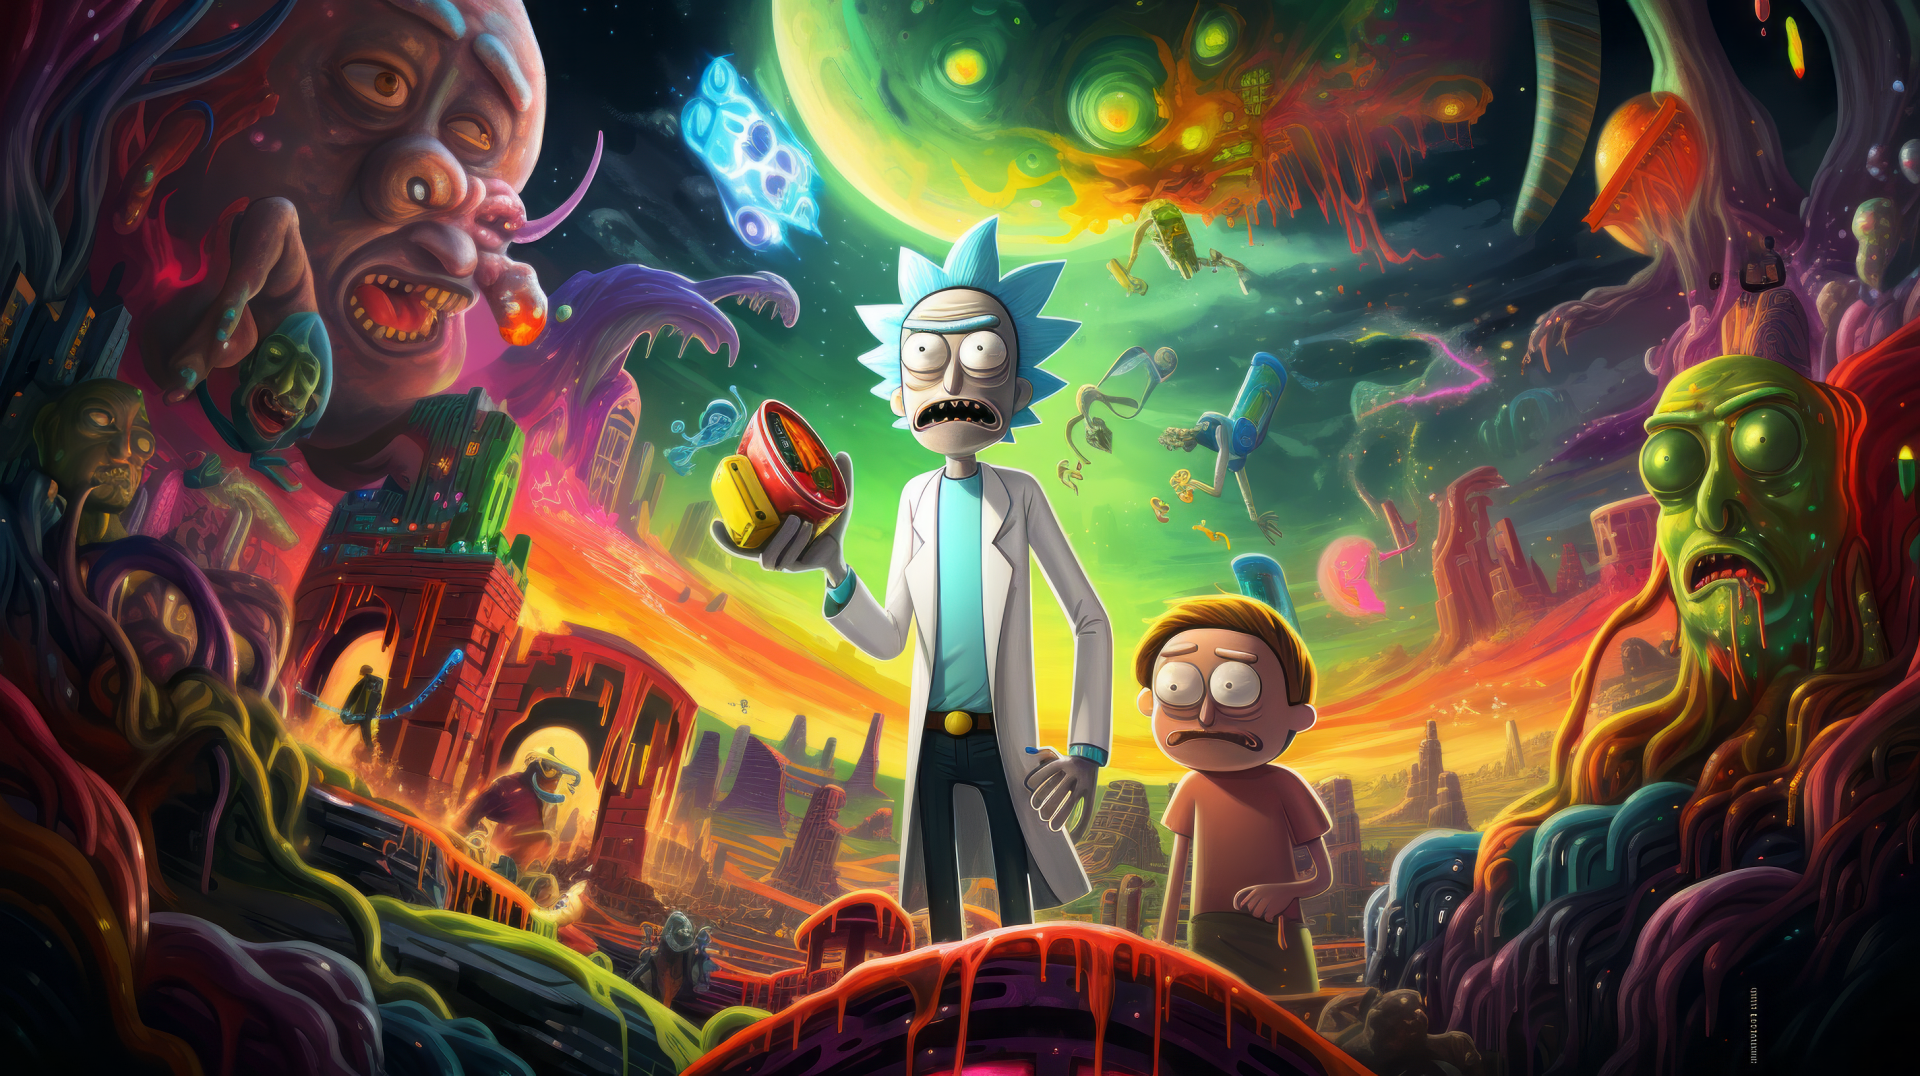 Rick And Morty Live Wallpapers 4K & HD